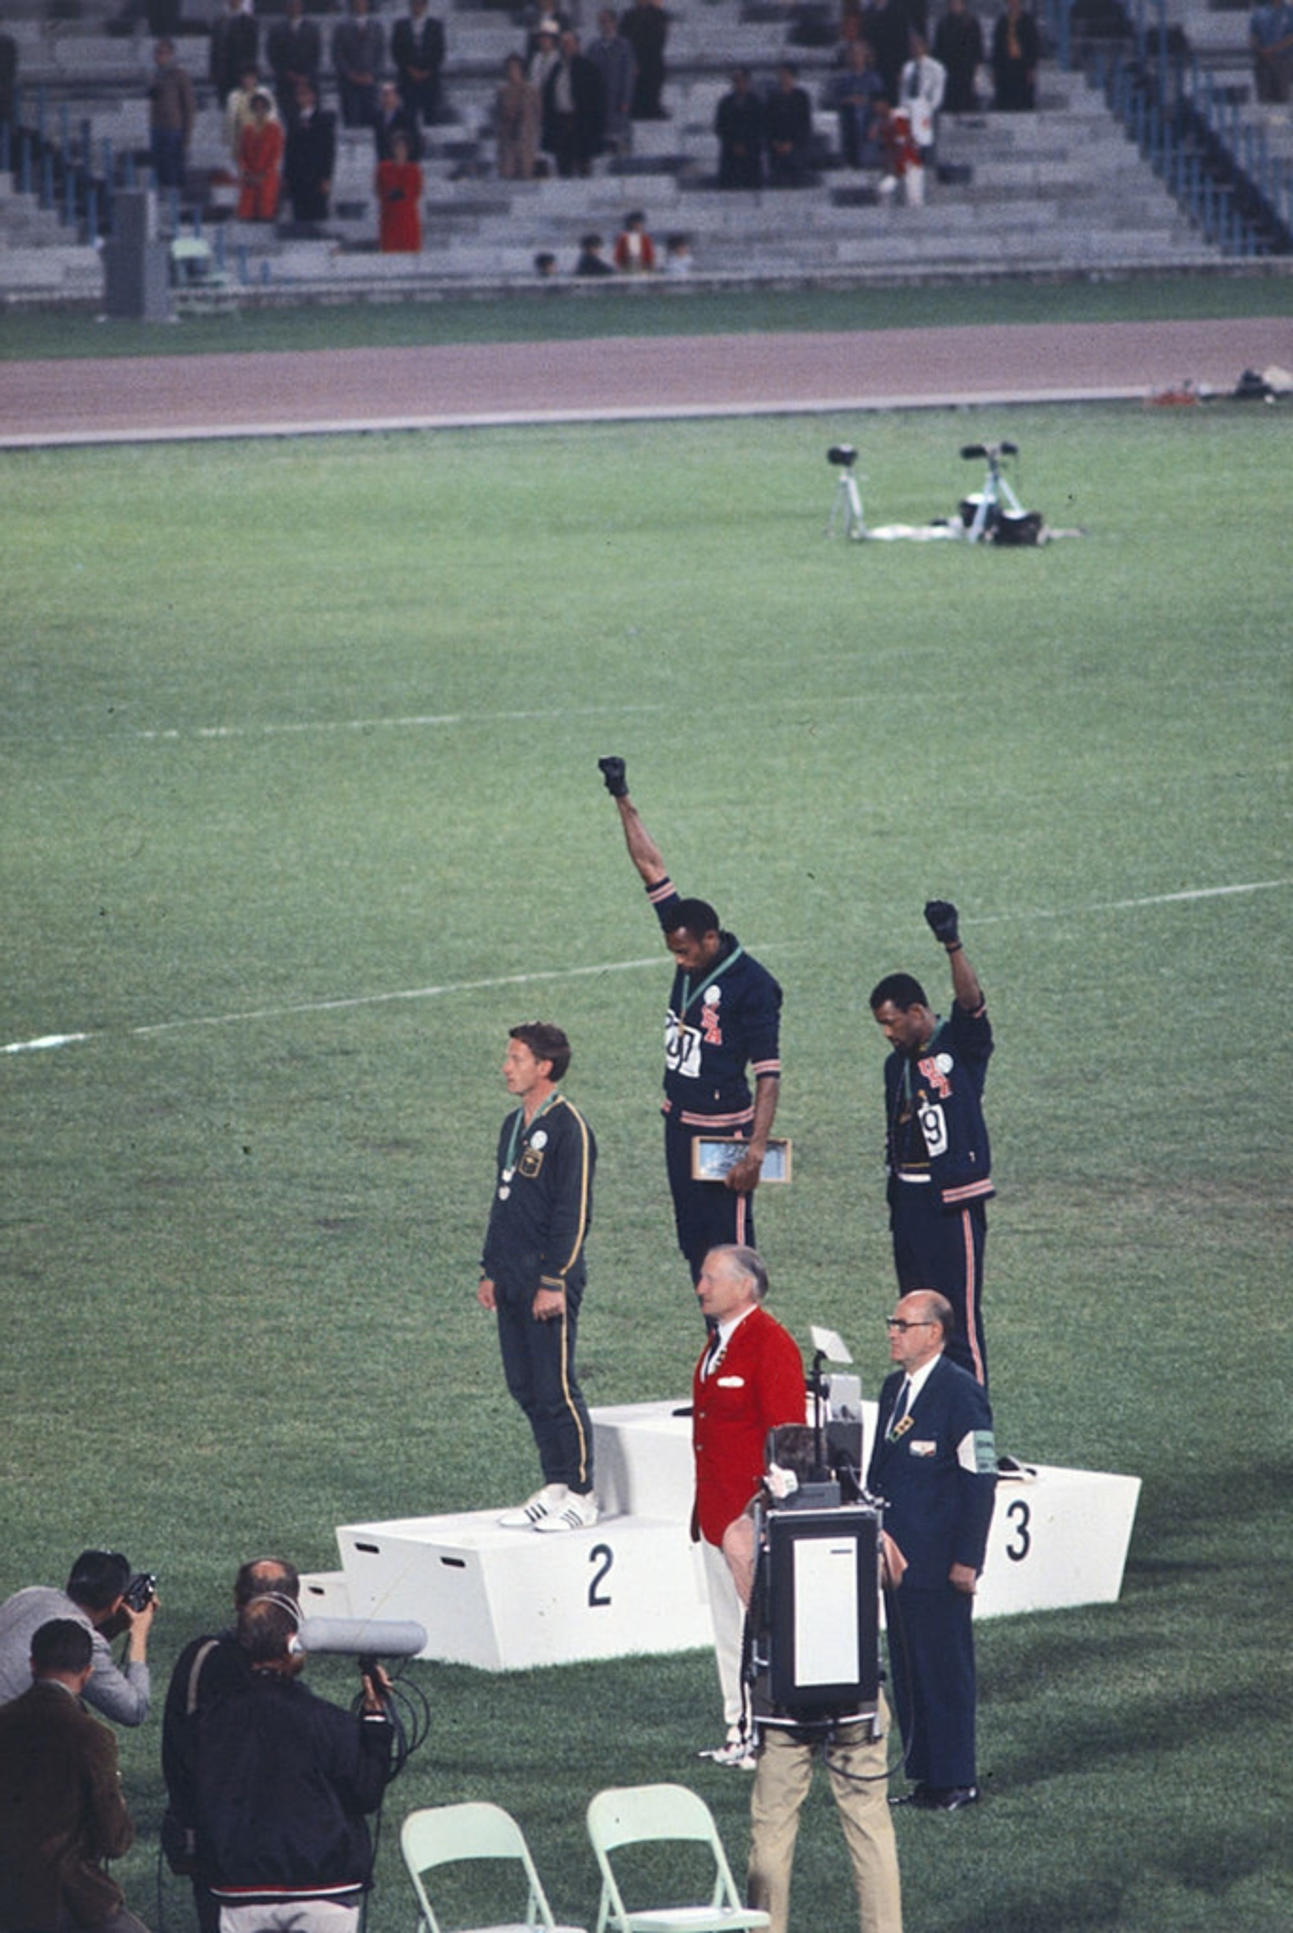 Olympic medalists Tommie Smith (center) and John Carlos (right) raise their fists during the national anthem in 1968.